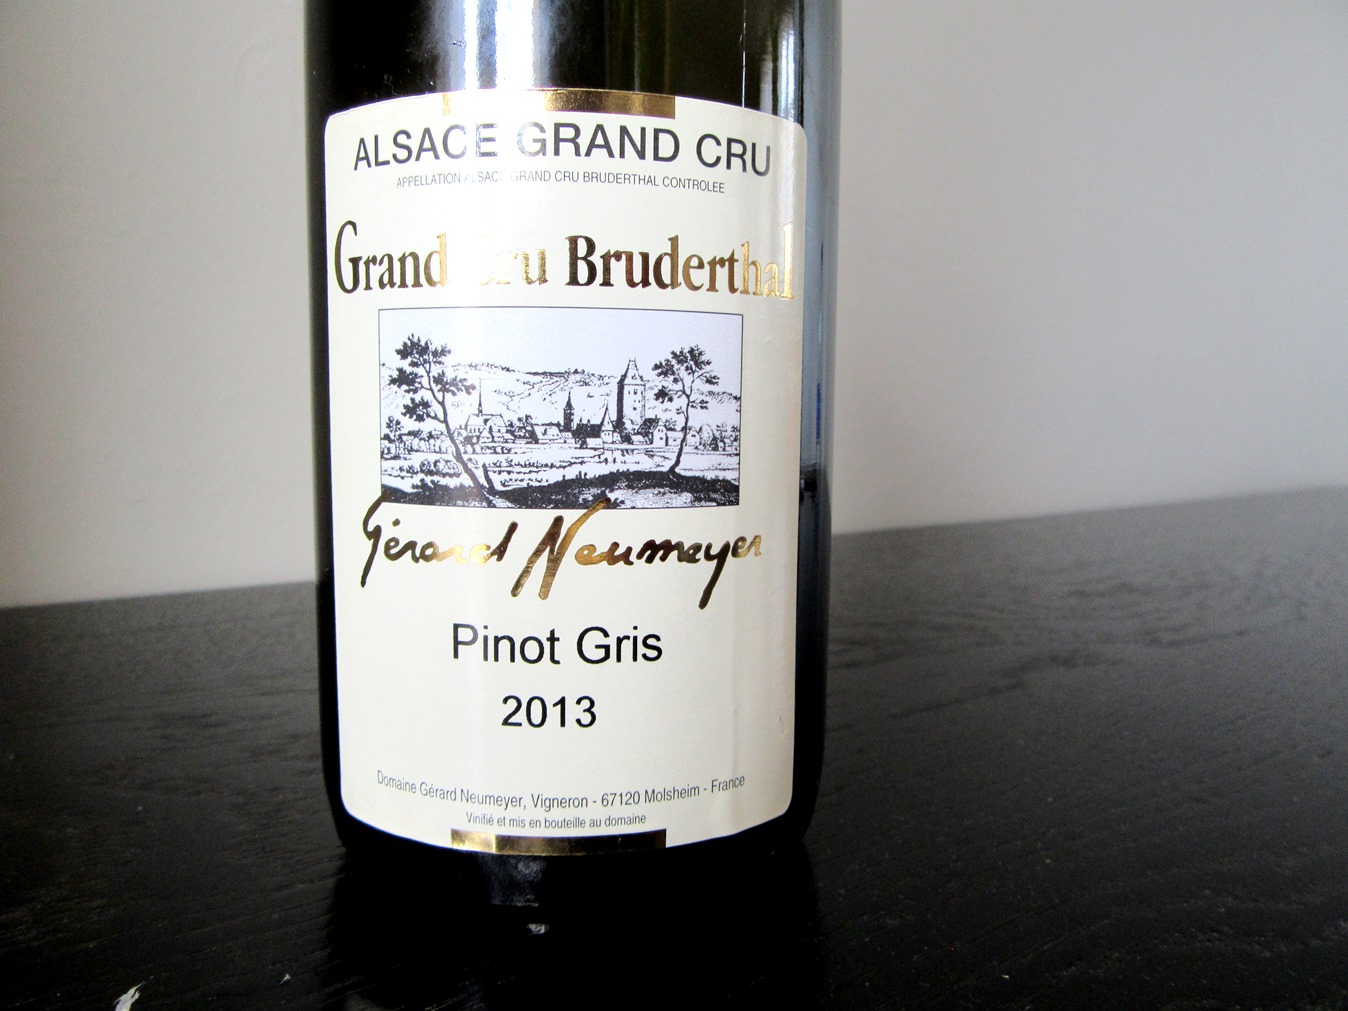 Domaine Gérard Neumeyer, Bruderthal Pinot Gris 2013, Alsace Grand Cru, France, Wine Casual